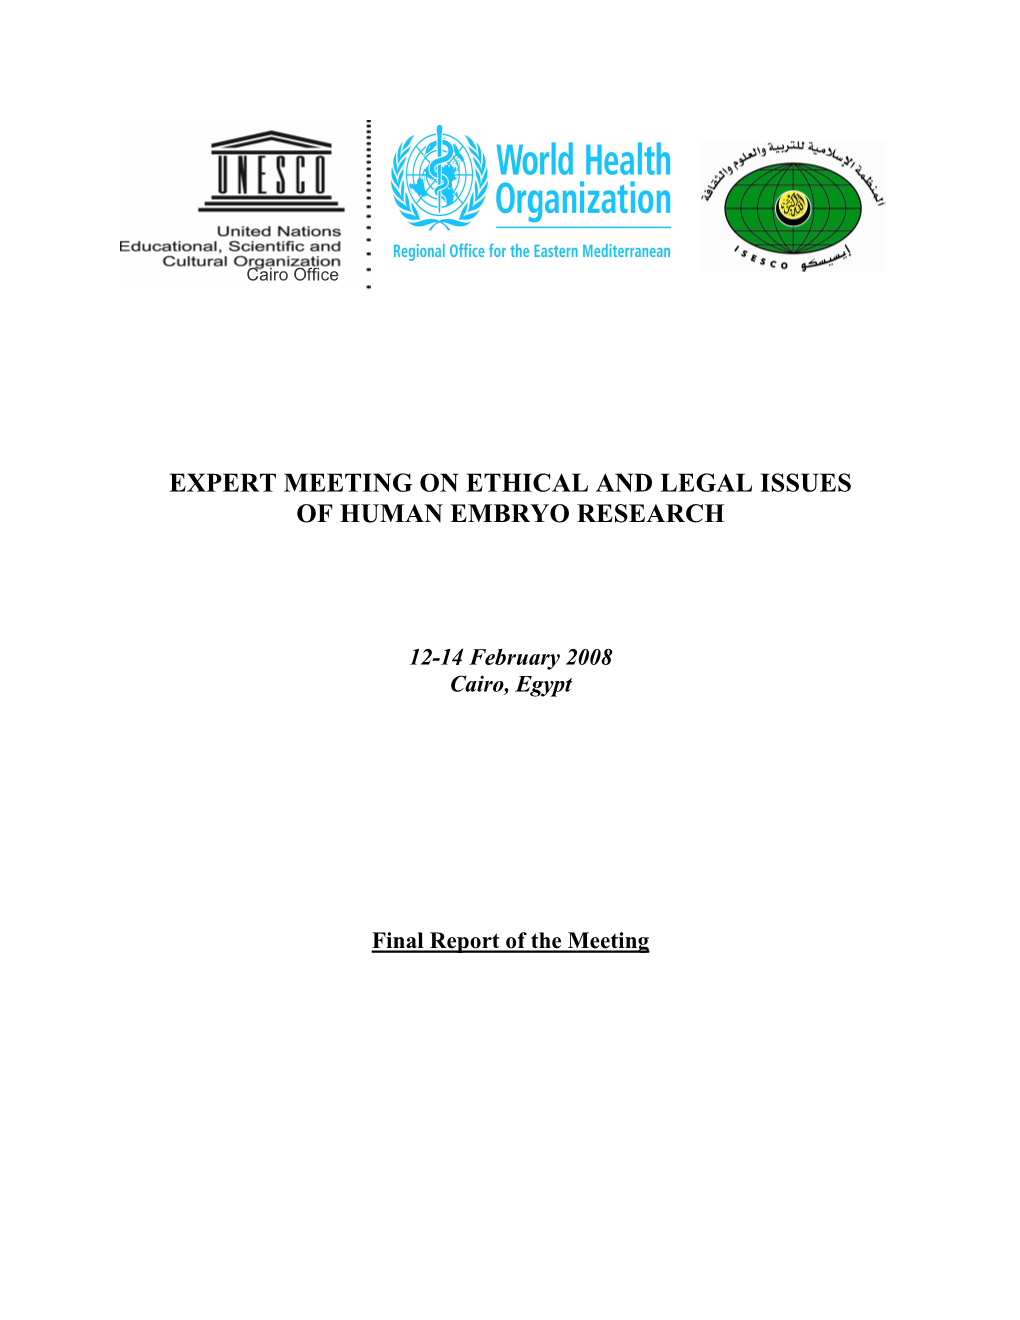 Expert Meeting on Ethical and Legal Issues of Human Embryo Research